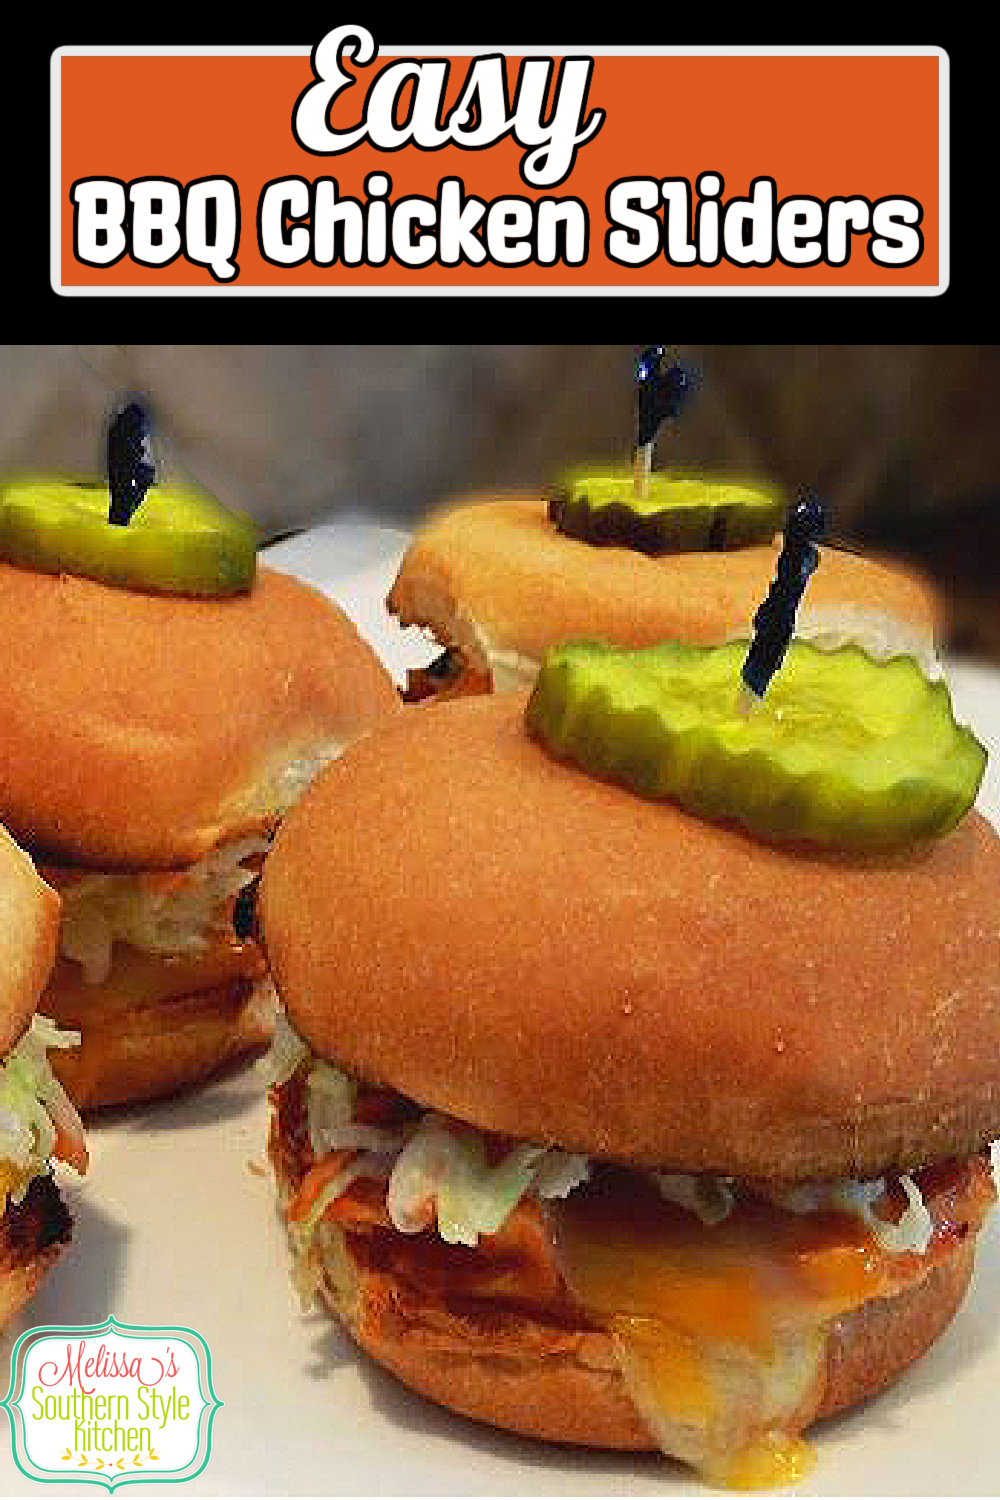 These mini Barbecue Chicken Sliders make a tasty game day appetizer or quick casual weekday meal with the family #chickensliders #barbecuechicken #easychickensliders #easychickenrecipes #gamedayrecipes #bbq #chicken